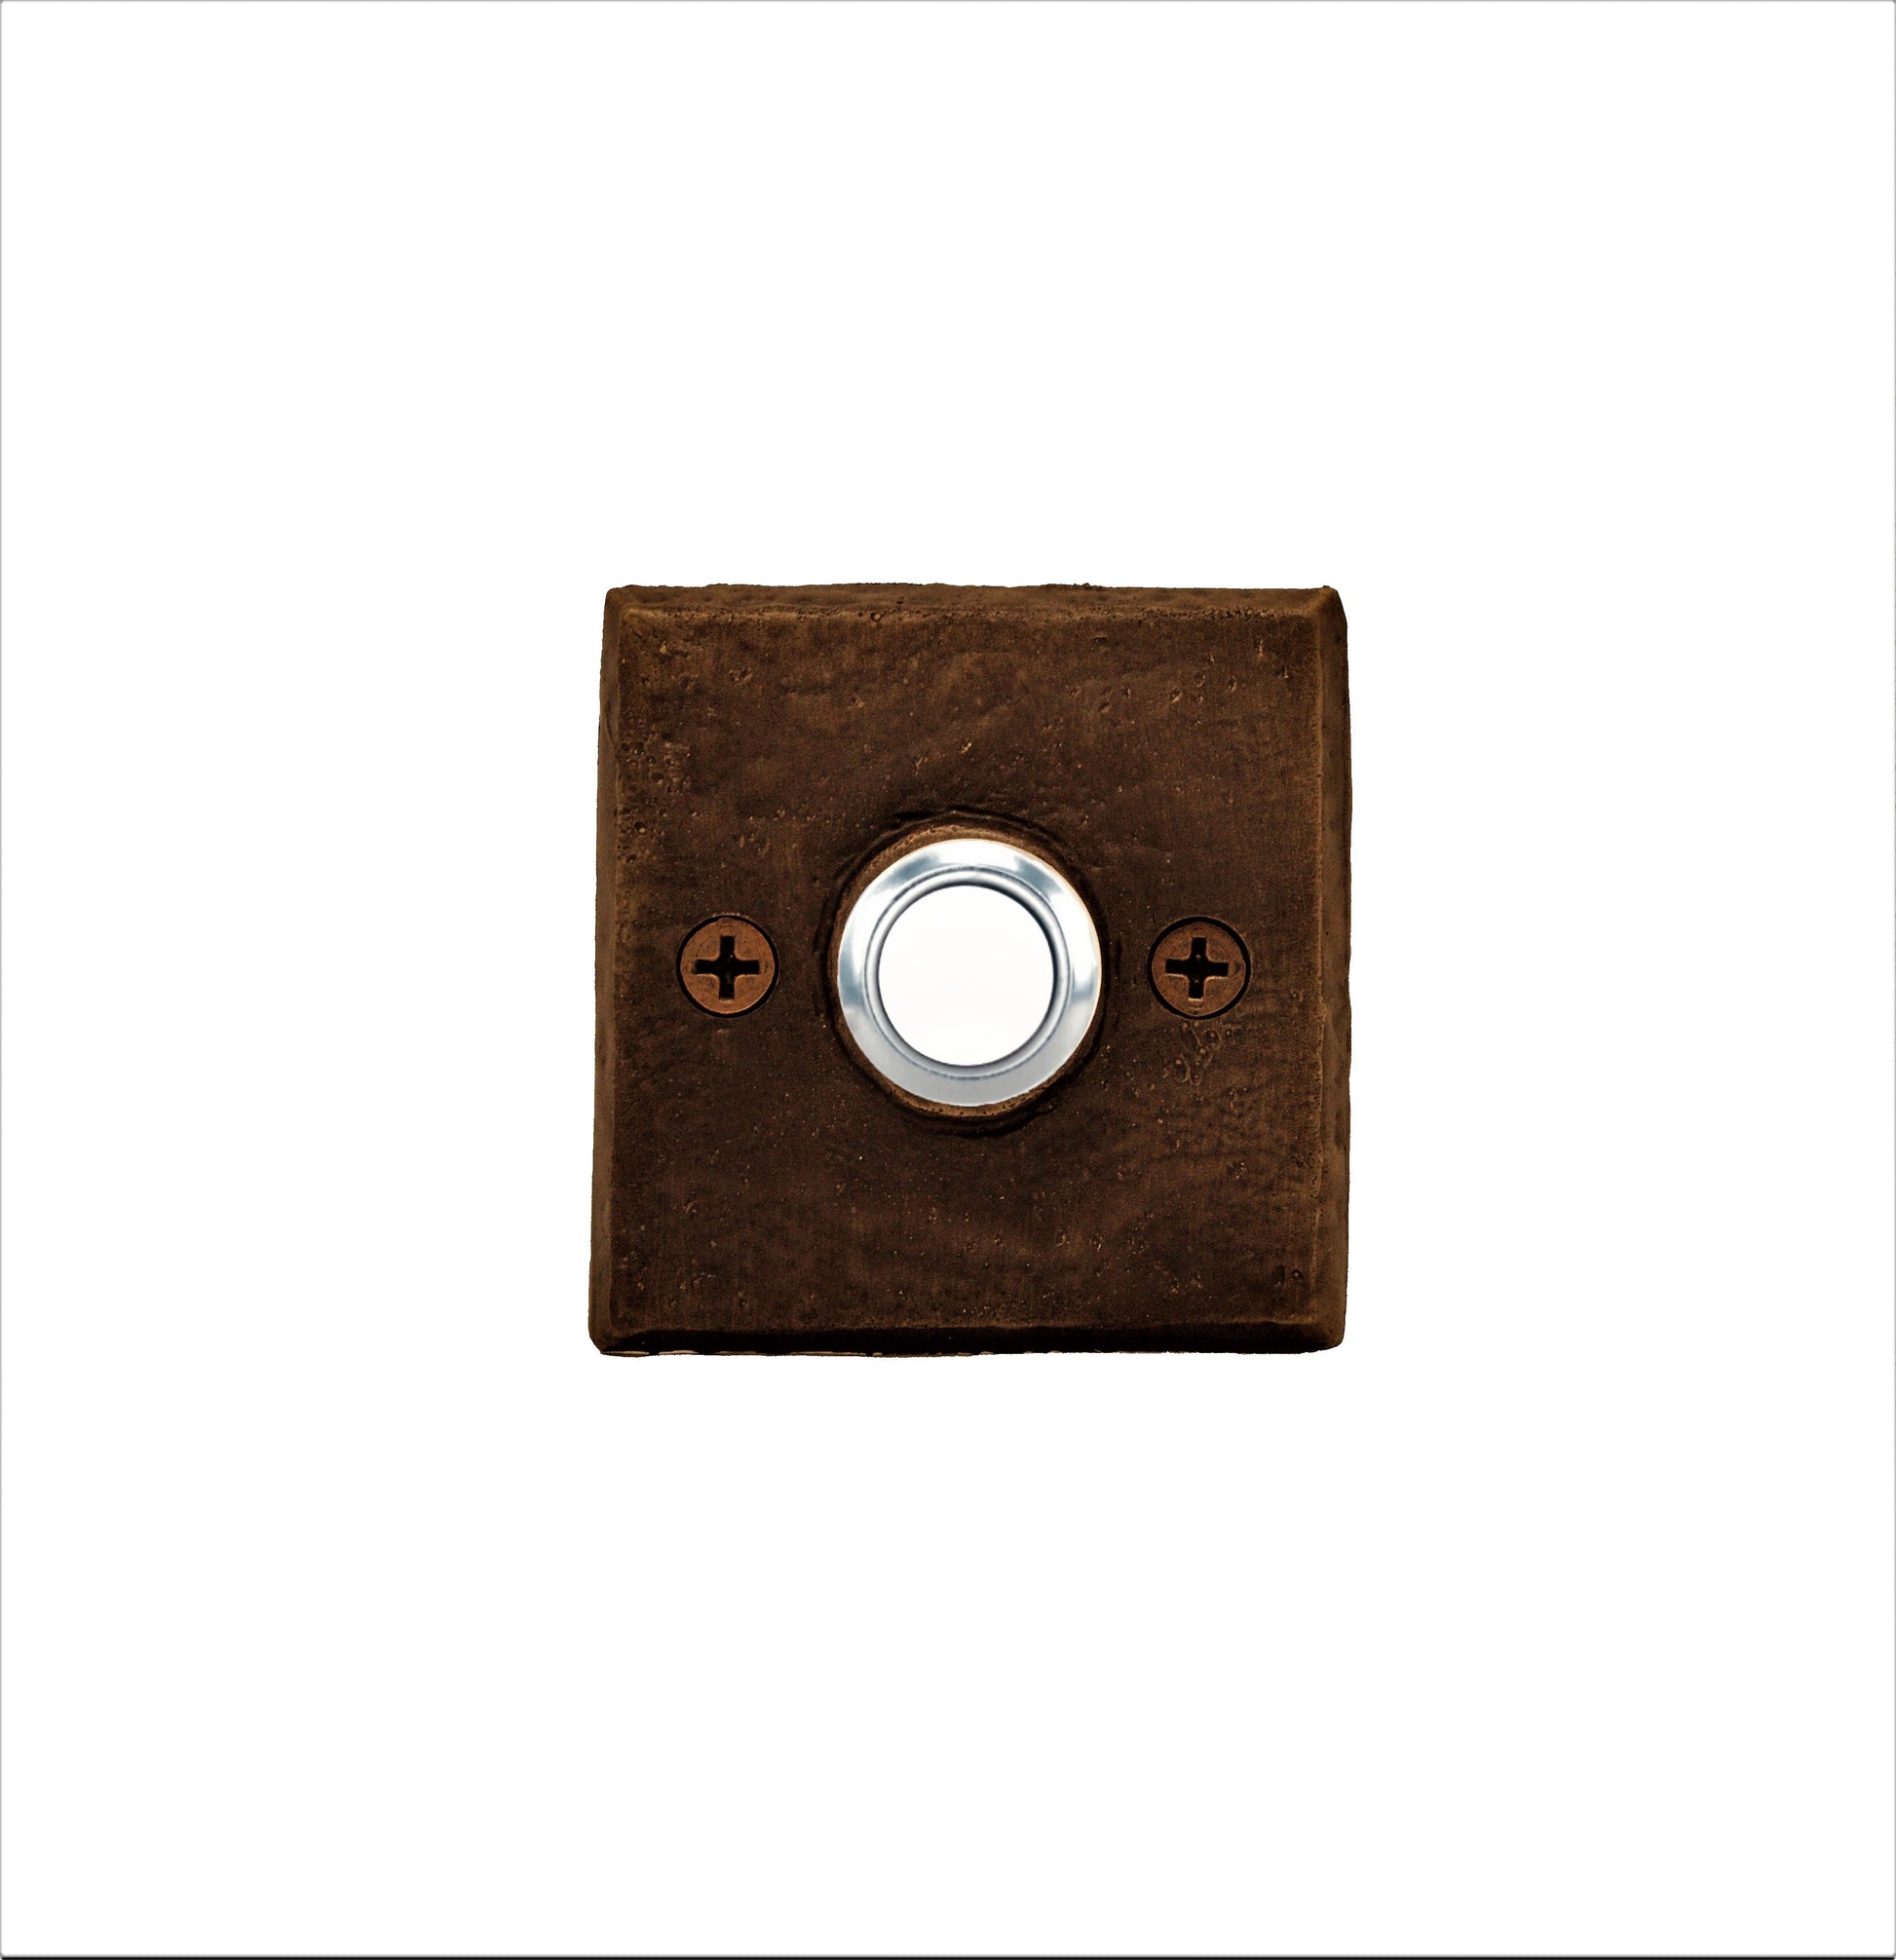 Classic square bronze doorbell with patina